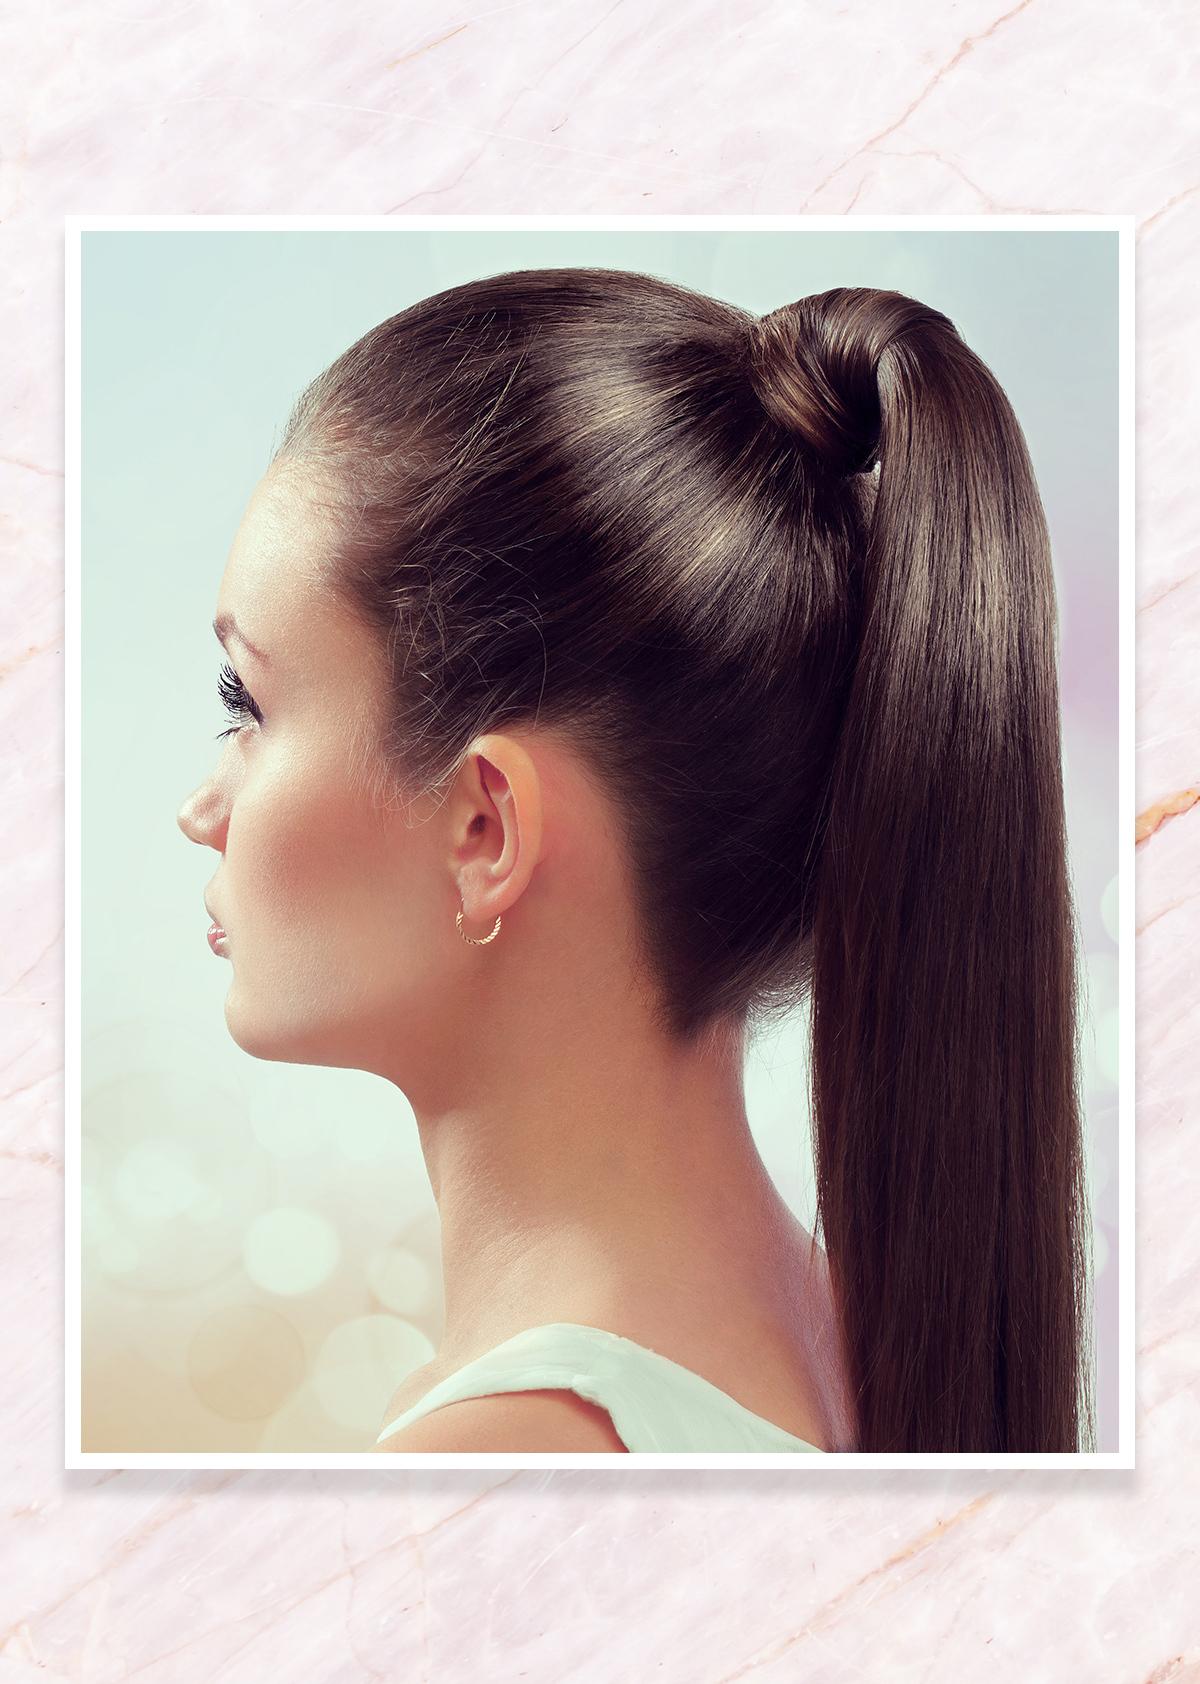 Earrings for a high pony tail